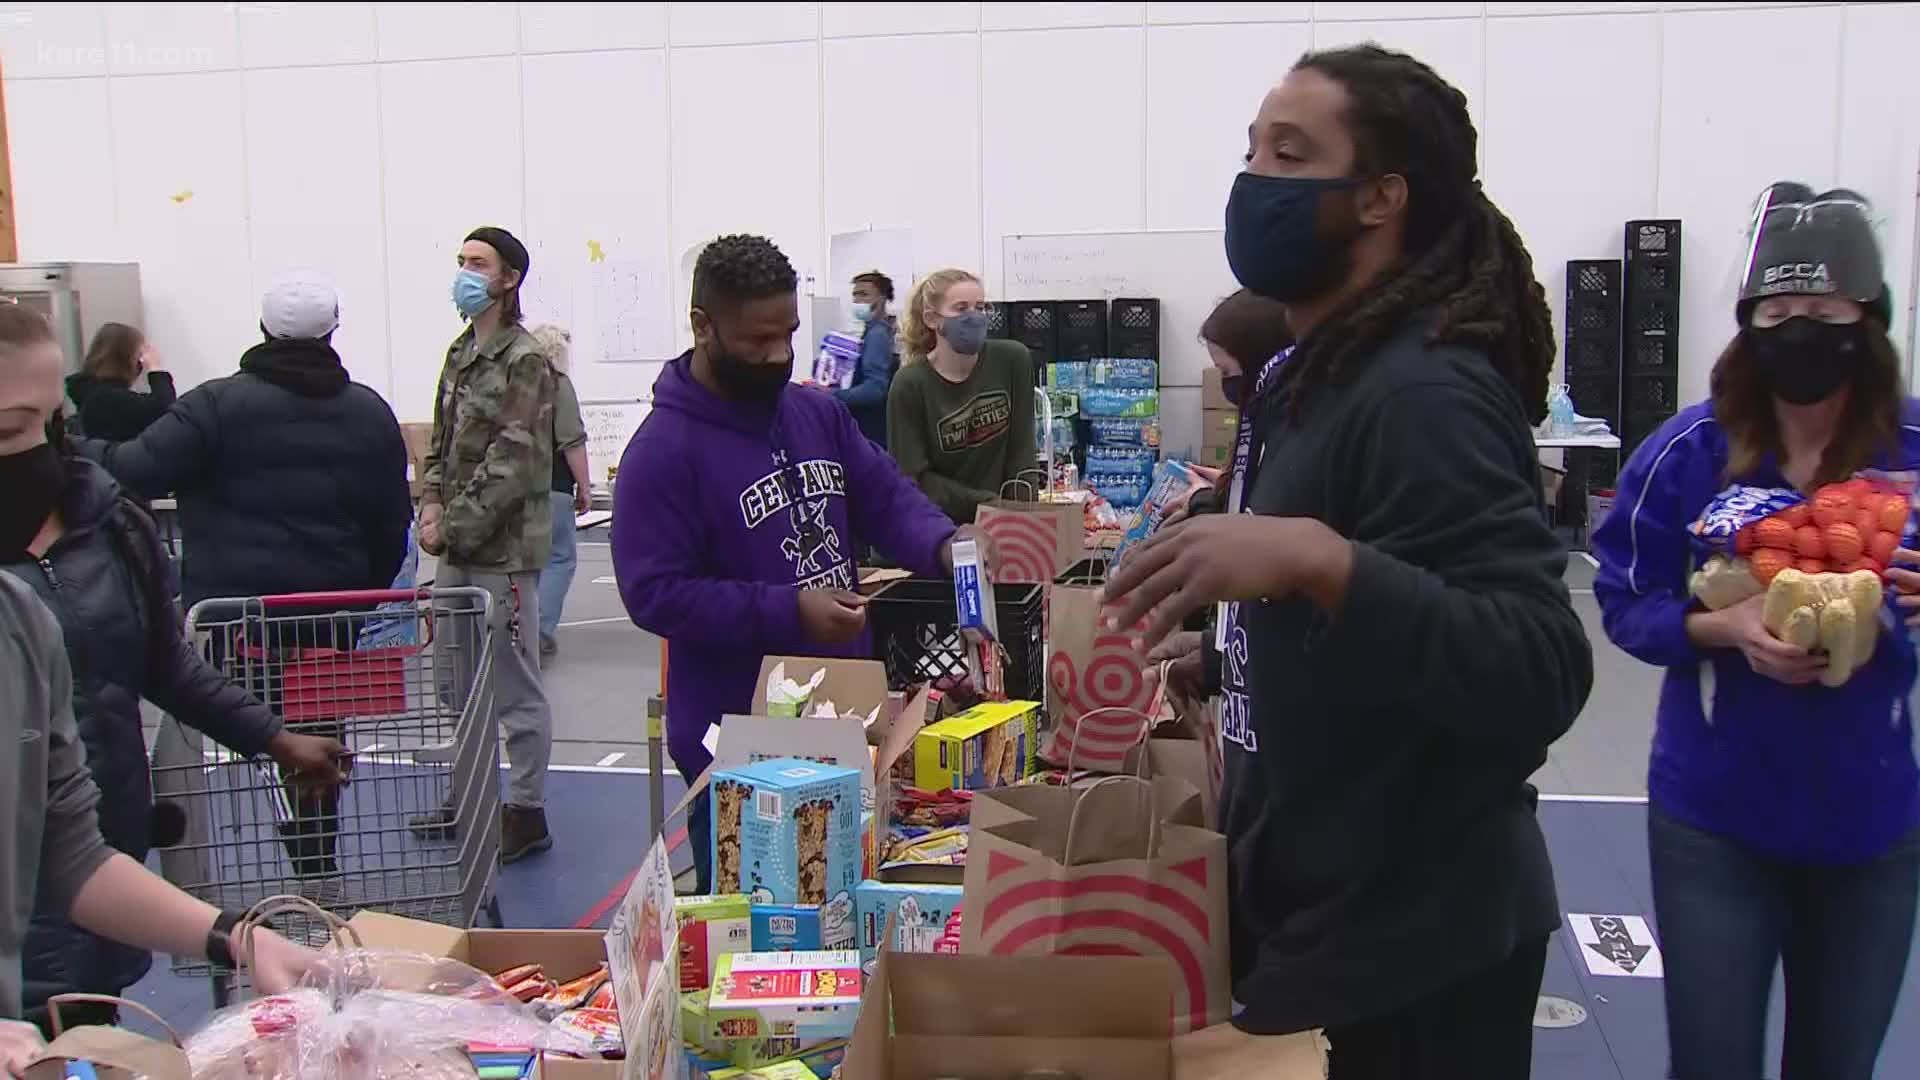 "The word got out and people just started donating and it's just been nonstop," said Courtney Bell-Duncan with Brooklyn Center Middle and High School.